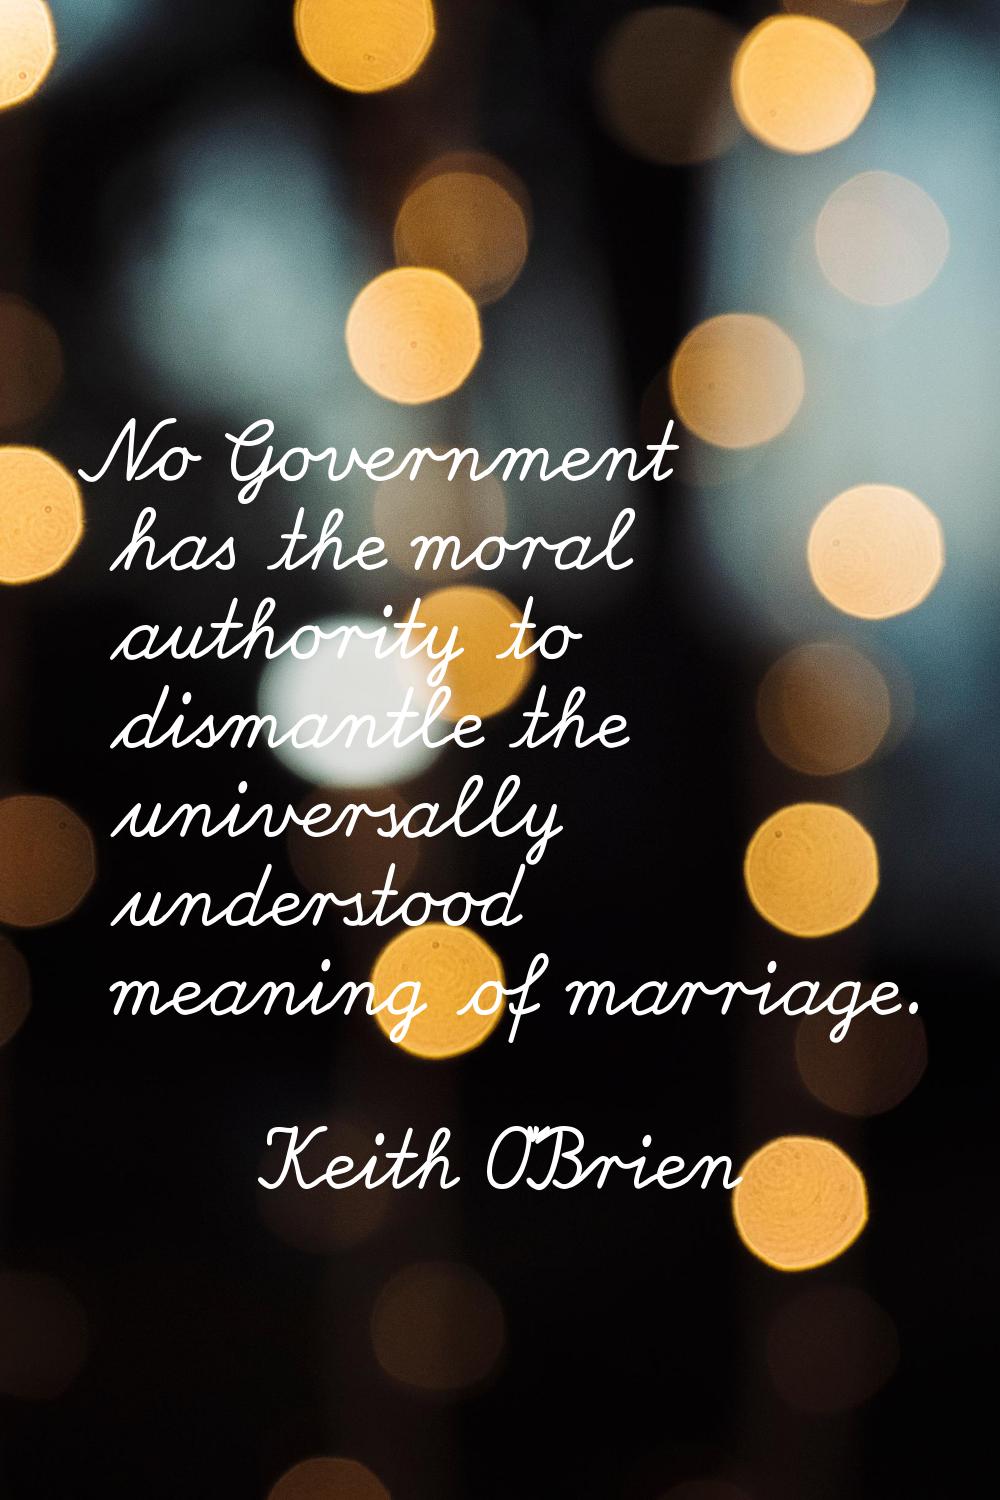 No Government has the moral authority to dismantle the universally understood meaning of marriage.